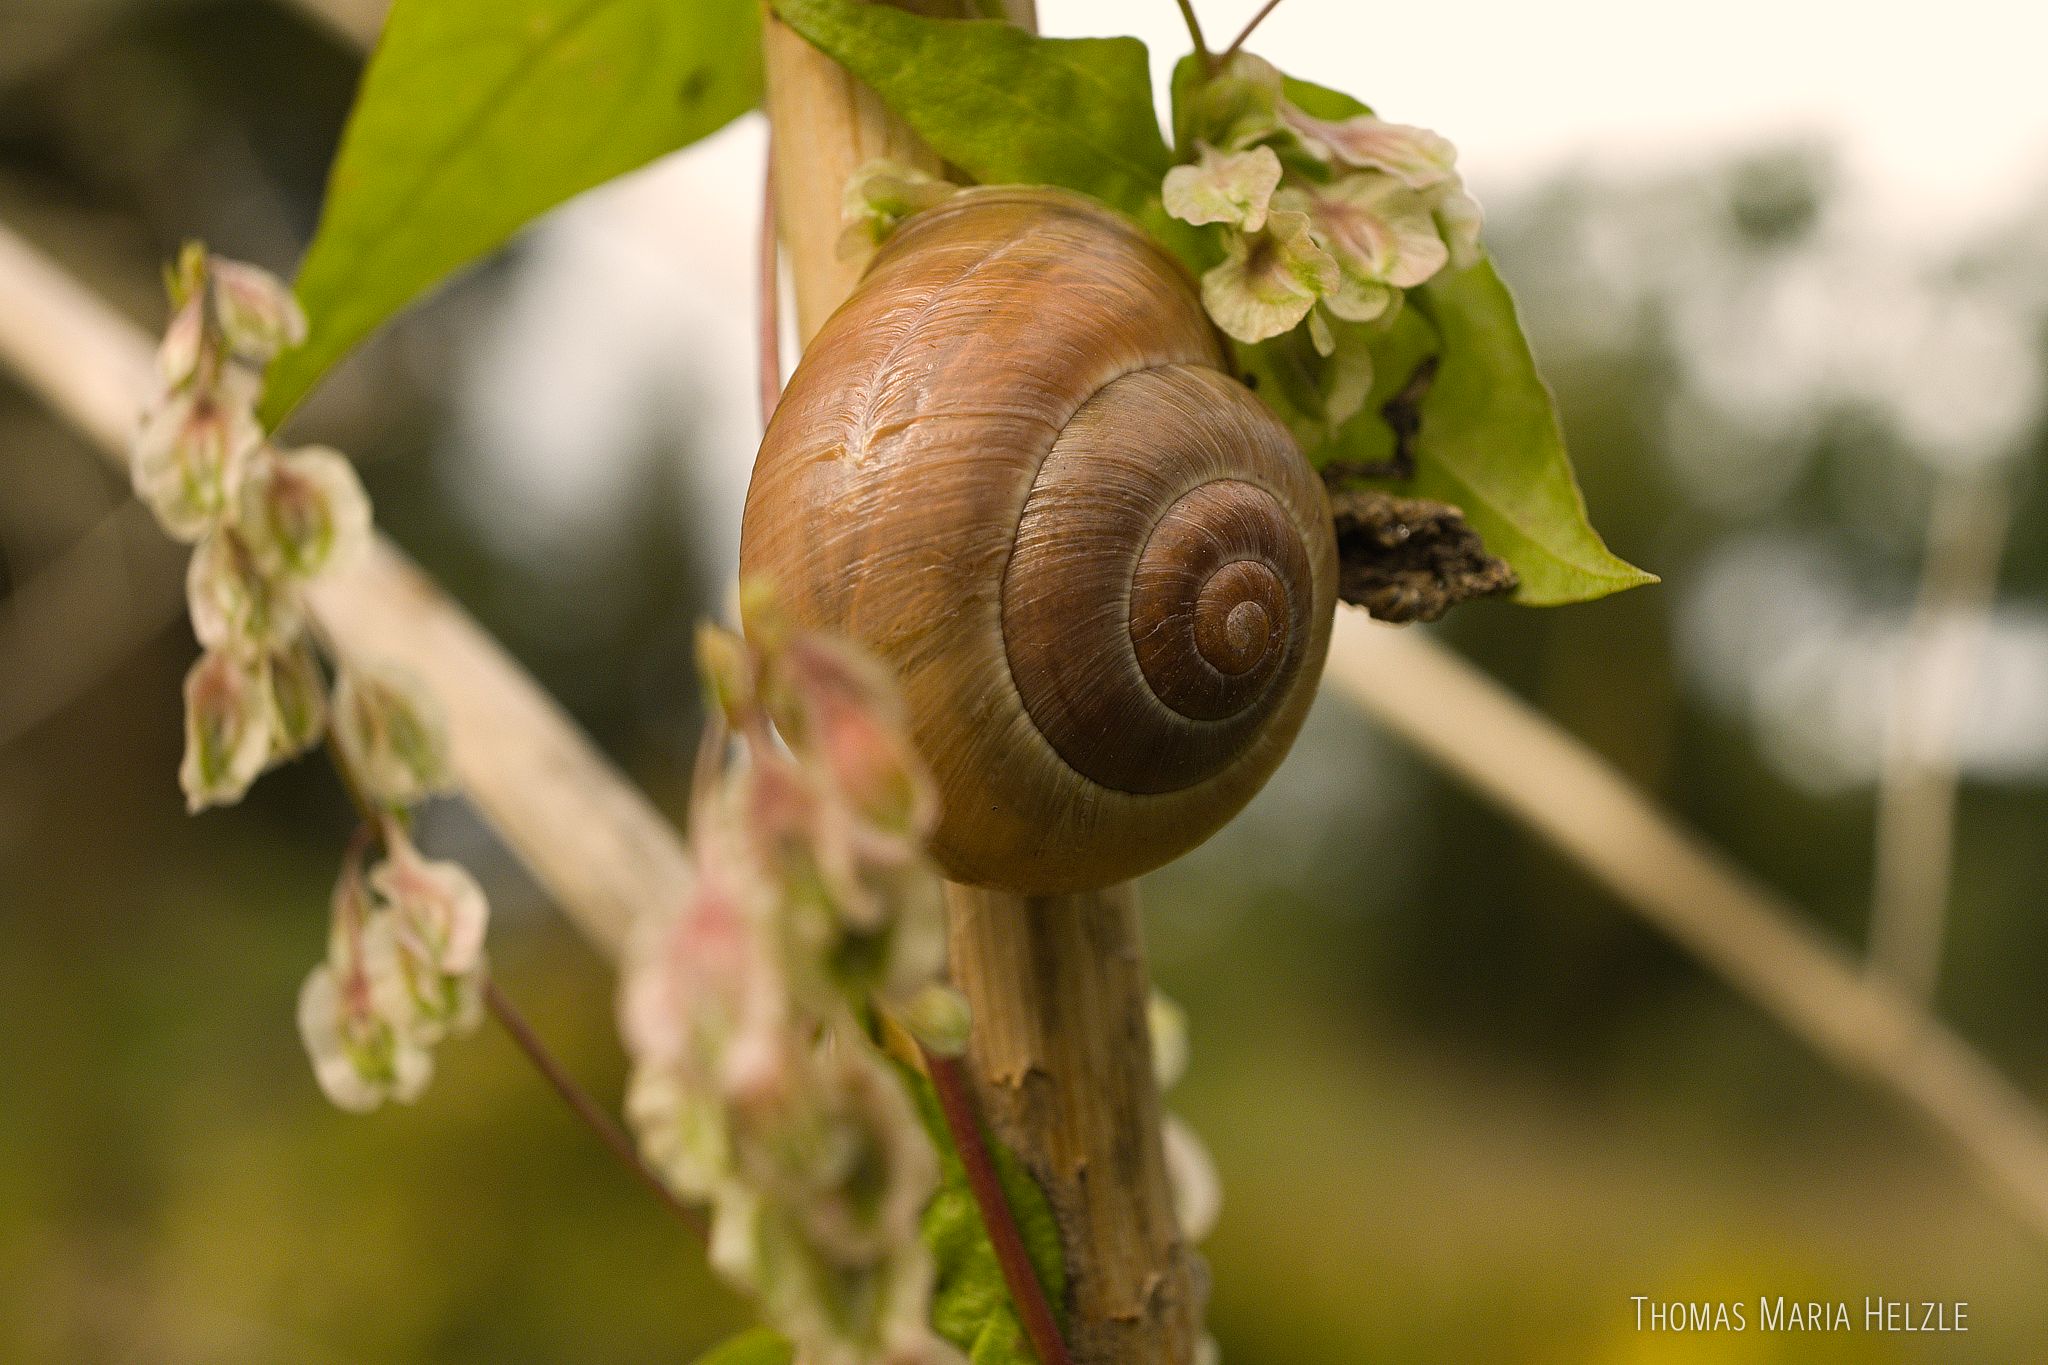 Close up of a snail shell sitting at an upright stick, surrounded by seeds and leaves with blurred landscape behind.